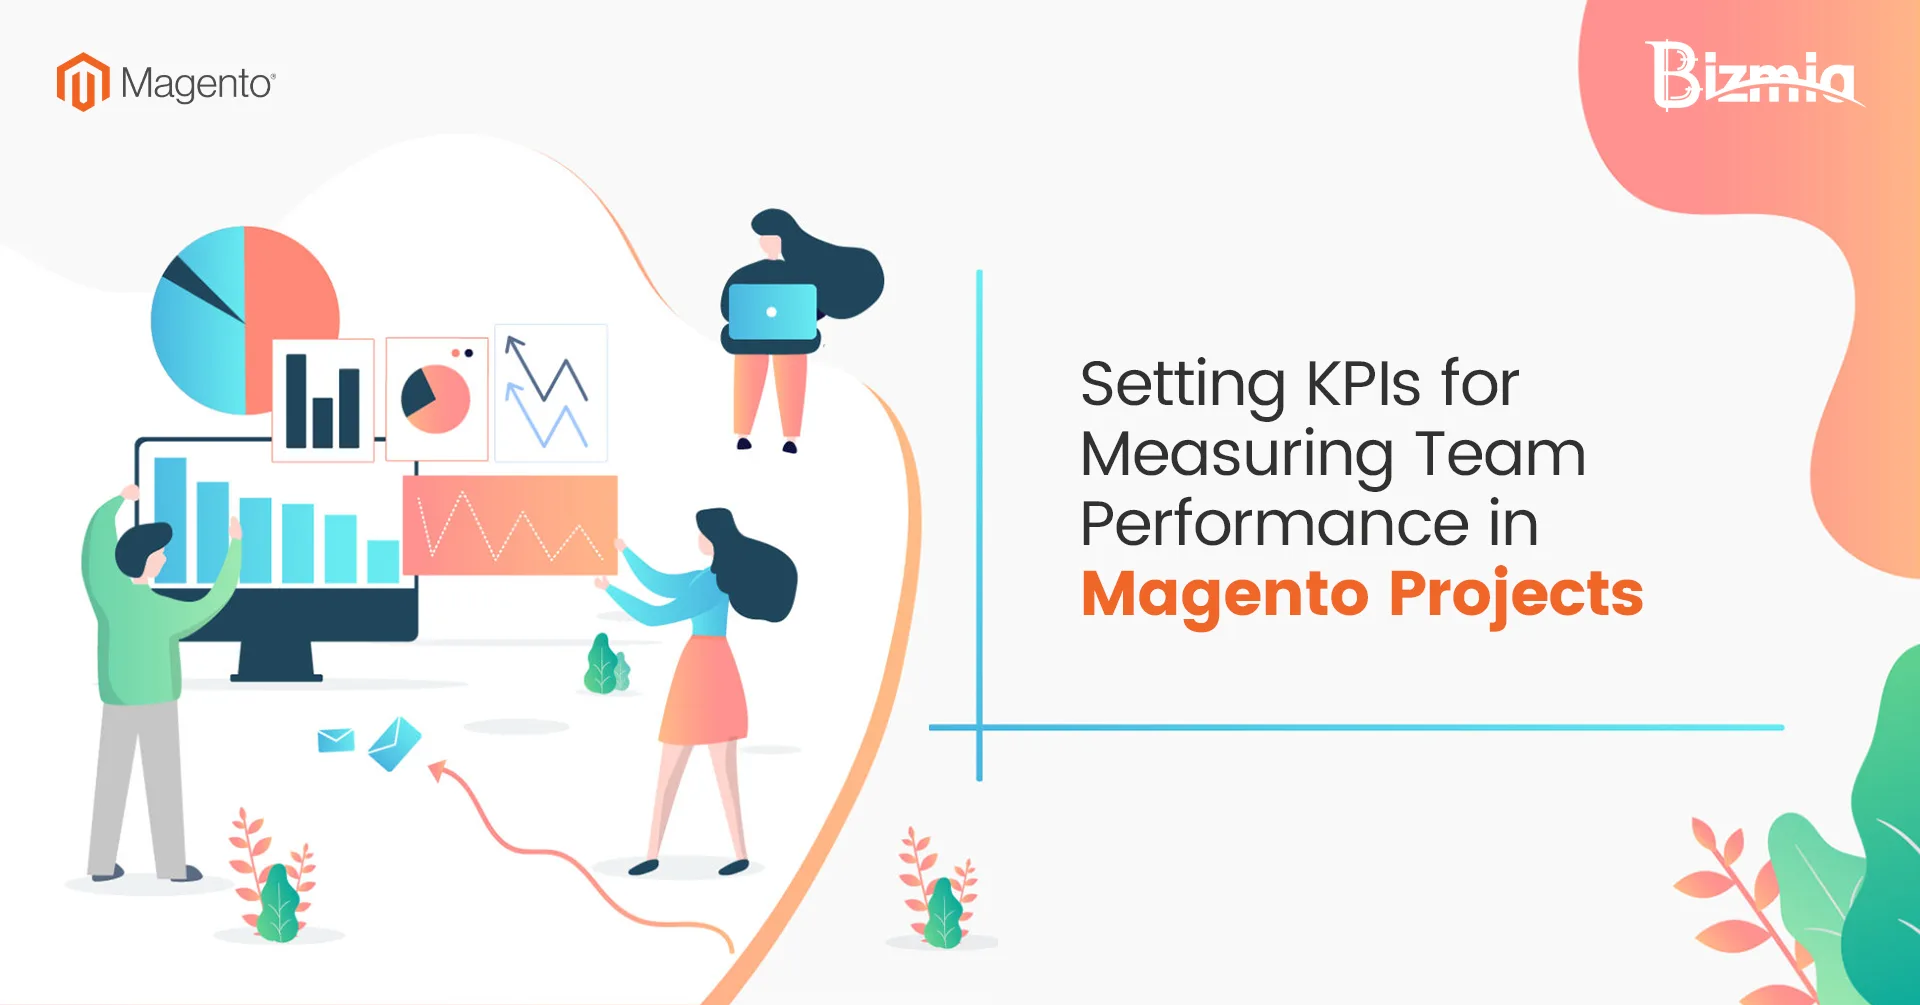 Magento Project Setting KPIs